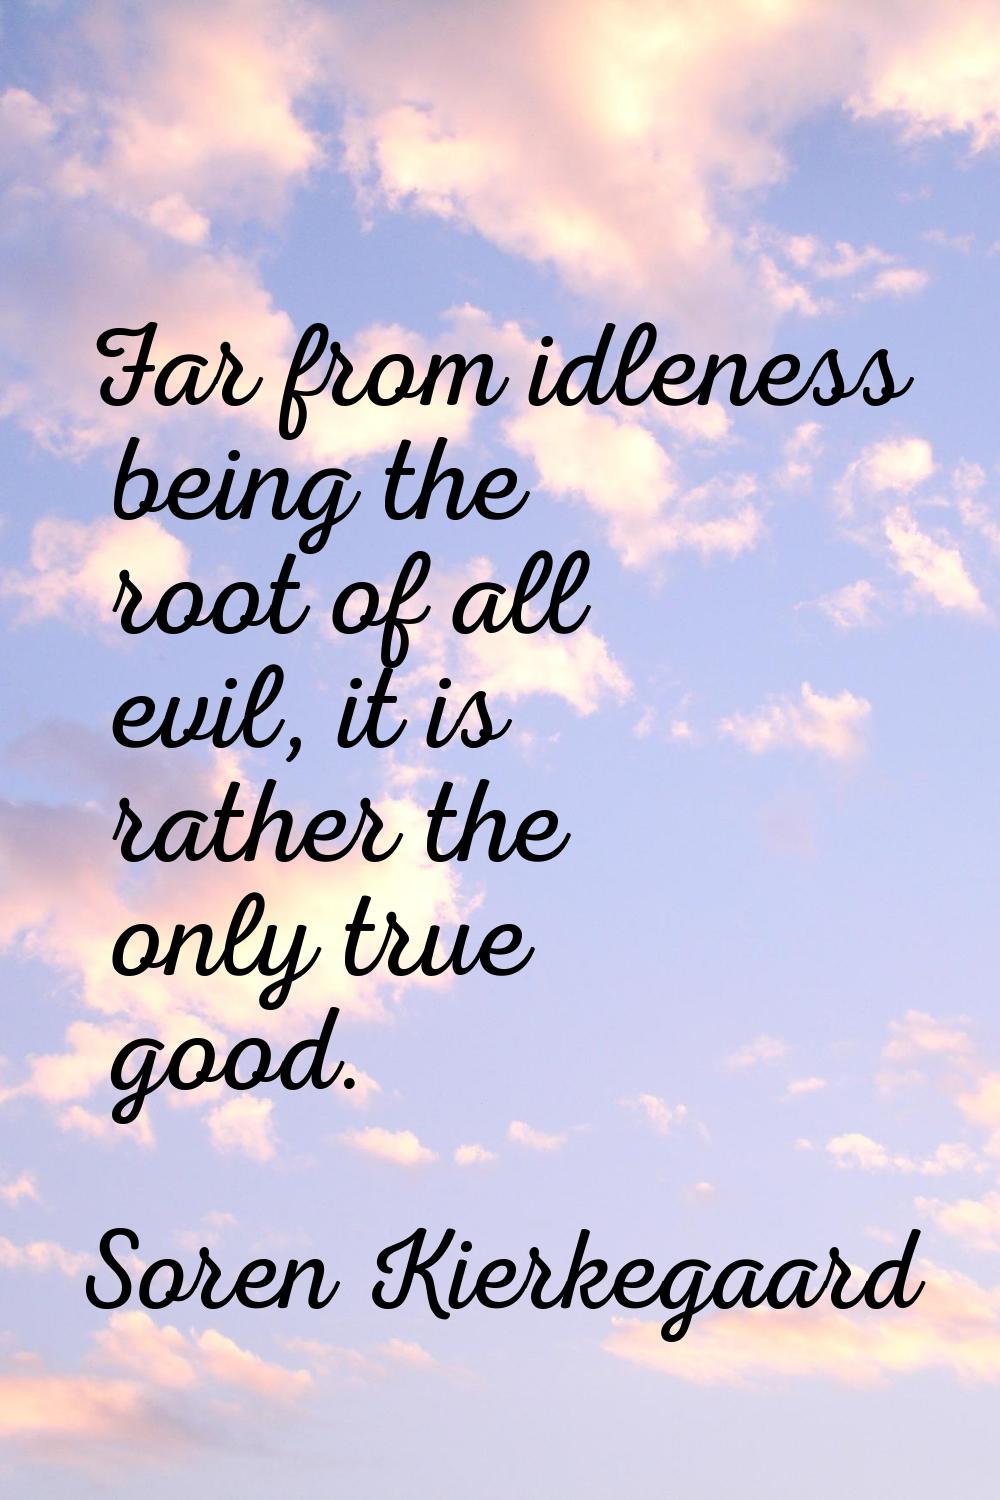 Far from idleness being the root of all evil, it is rather the only true good.